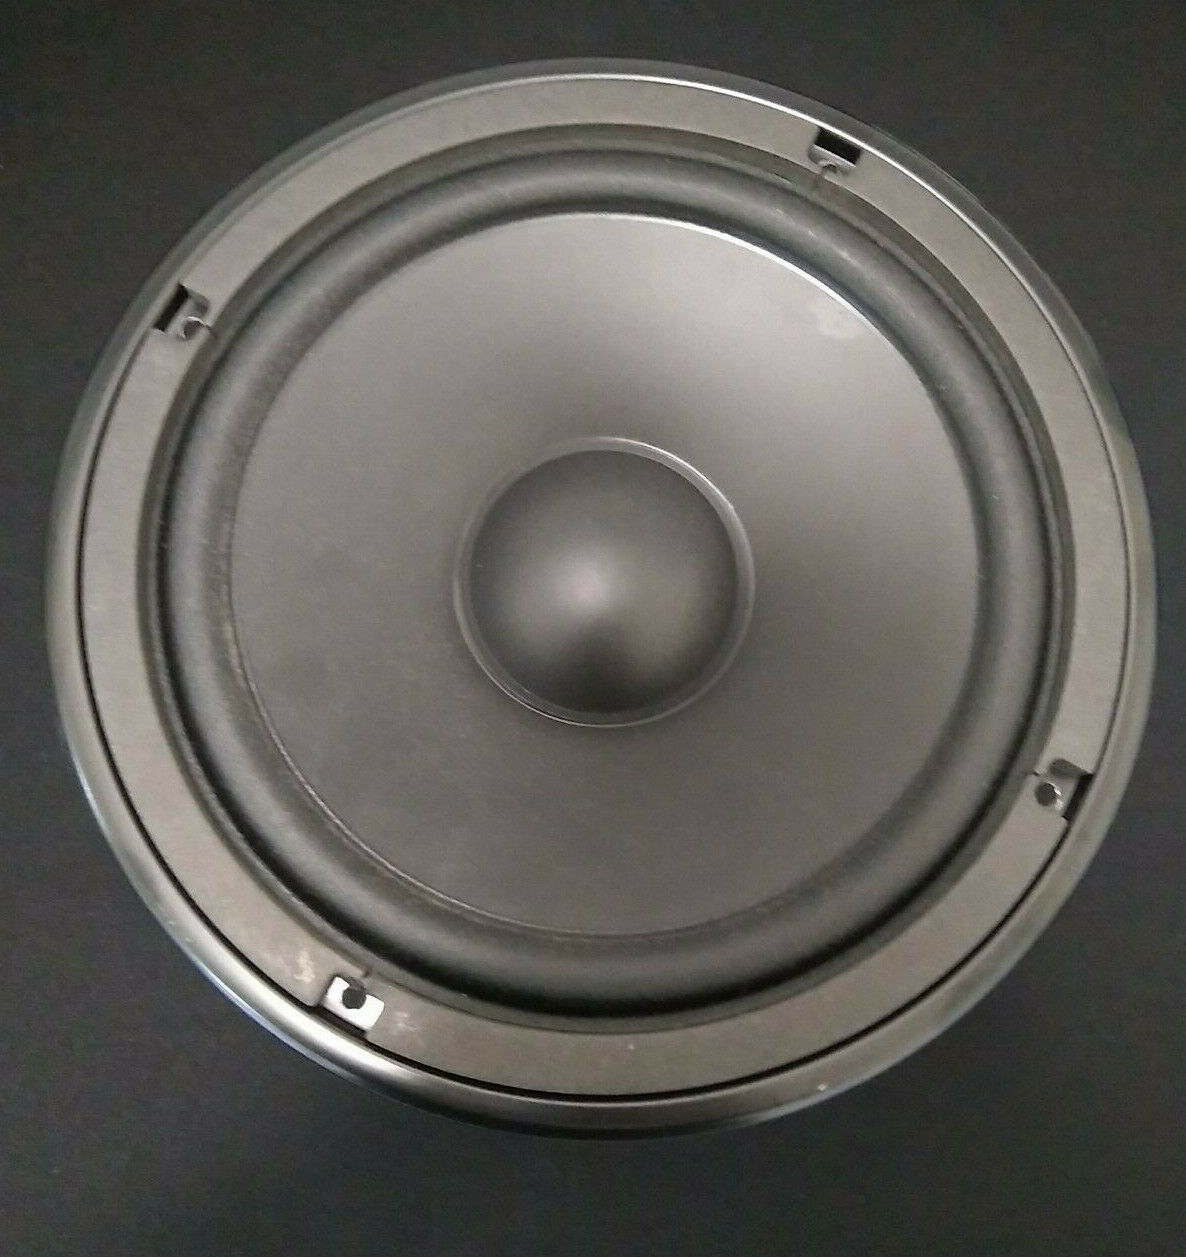 Yamaha 8" Woofer 110033 For Ns-a637 Bookshelf Speaker Genuine Oem Replacement